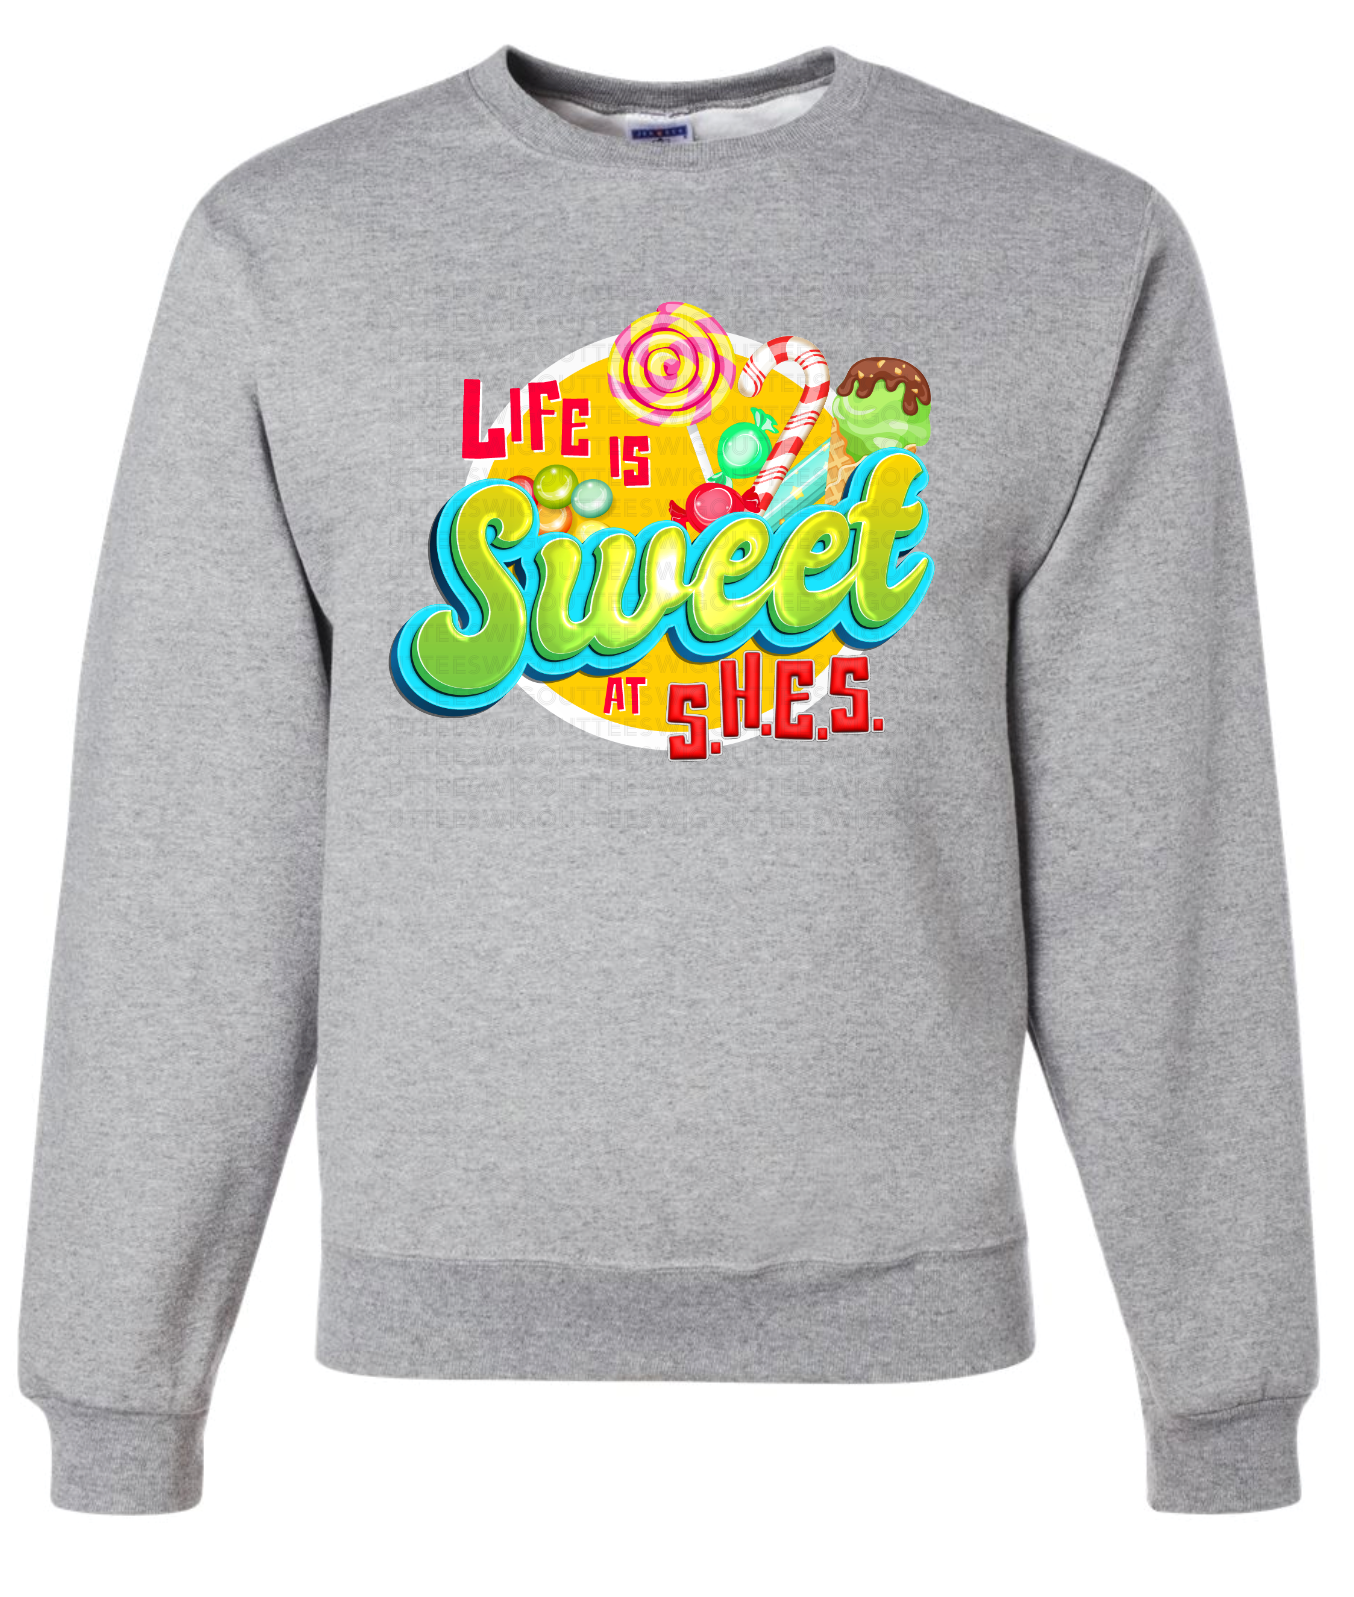 Life is Sweet at SHES Crew Sweatshirt